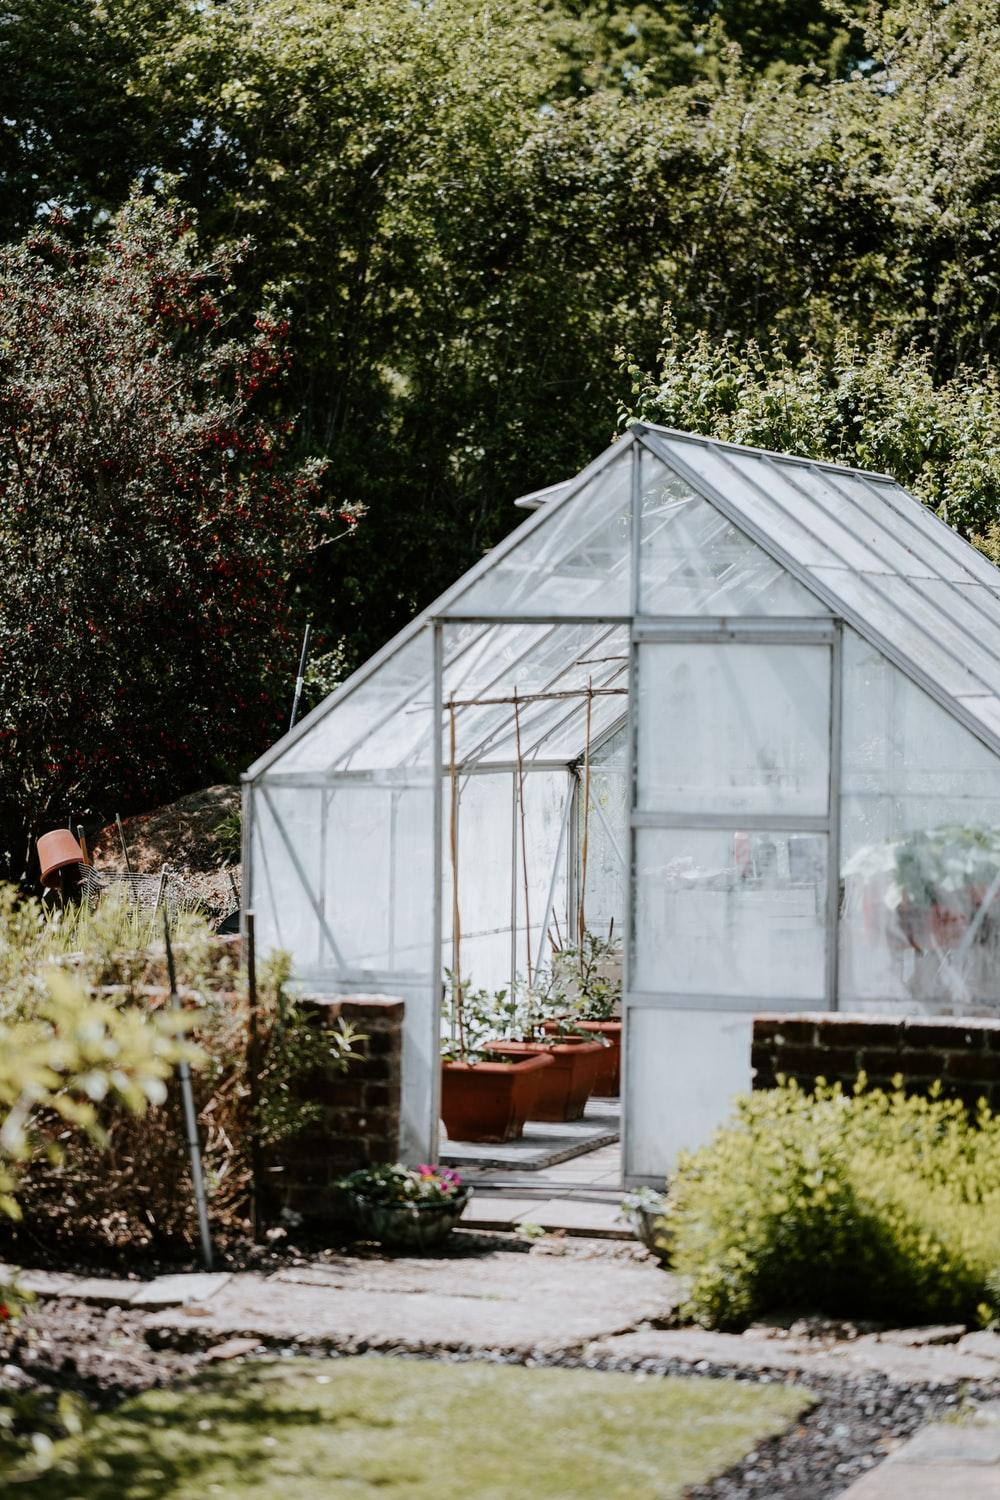 A beautiful greenhouse installed in a residential yard